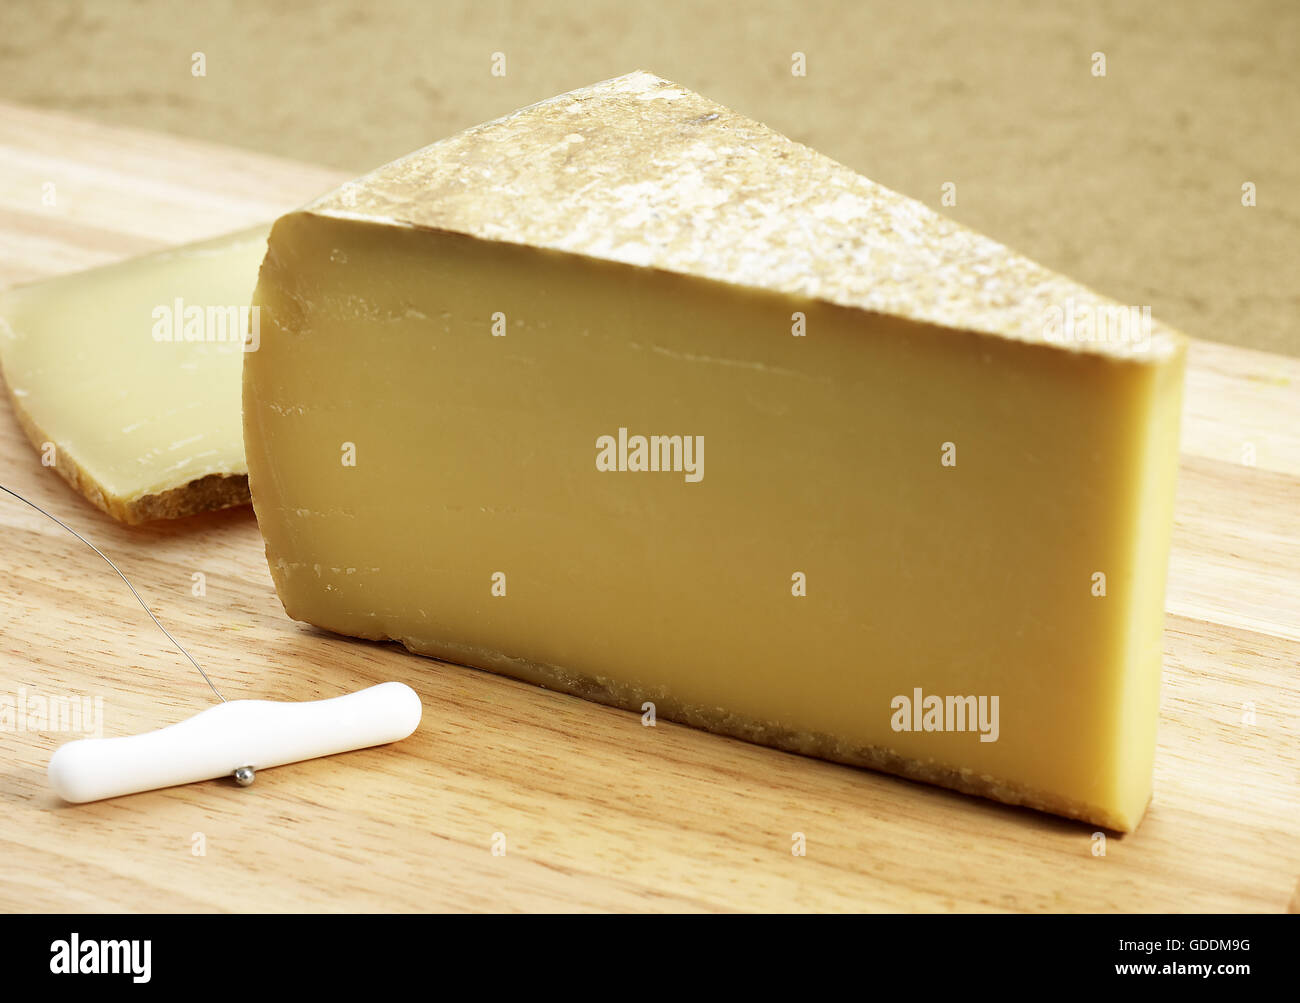 Comte, French Cheese made from Cow's Milk Stock Photo